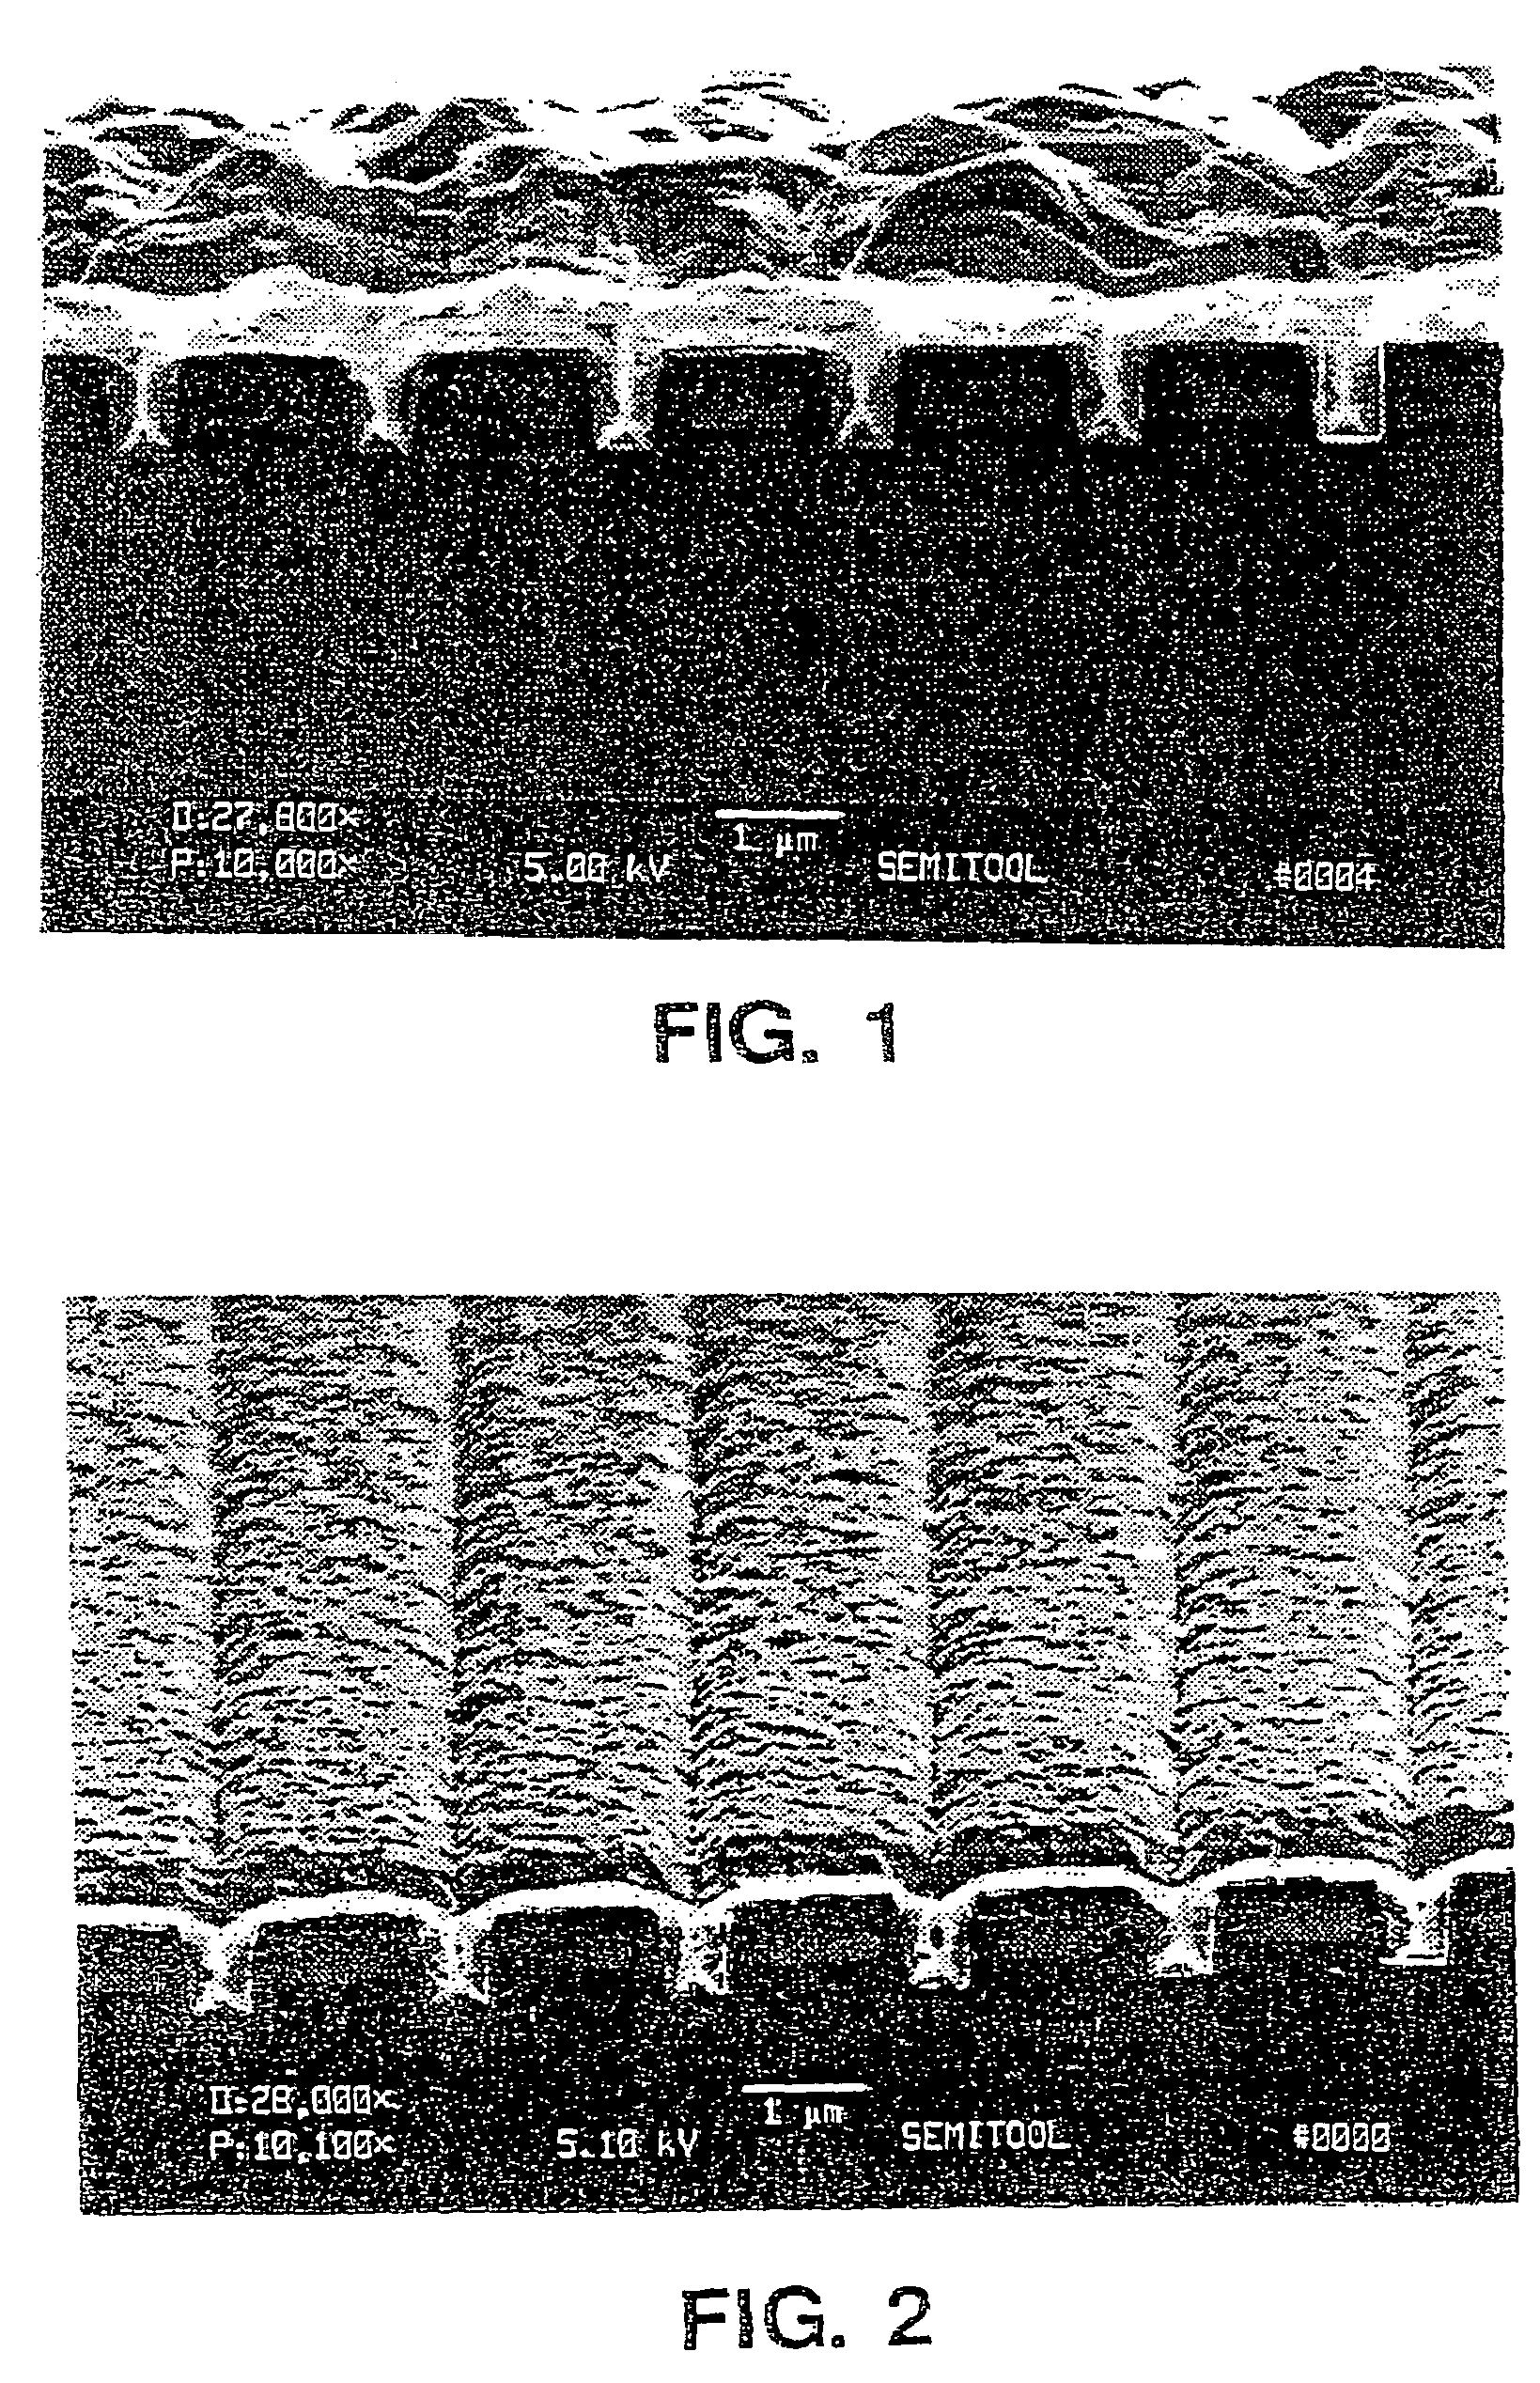 Method of submicron metallization using electrochemical deposition of recesses including a first deposition at a first current density and a second deposition at an increased current density